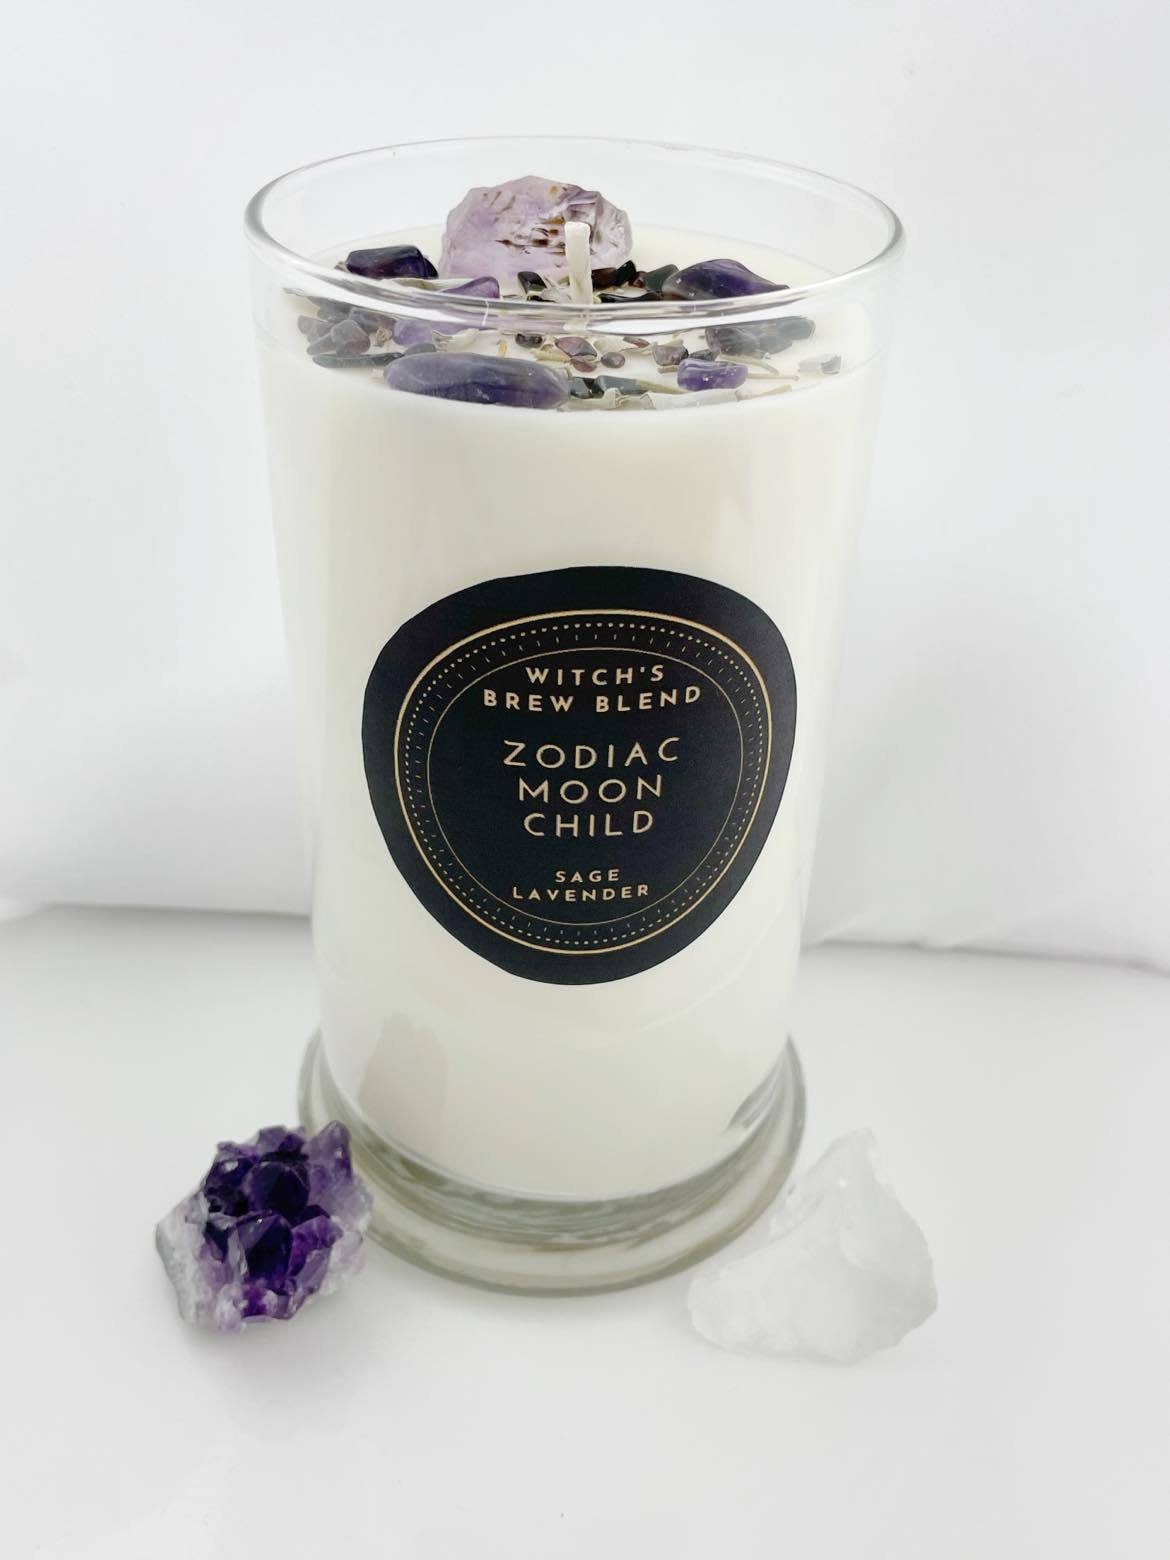 Crystal Herb Candle \u2013 100% Natural Soy Wax Lavender & White Sage Witch\u2019s Brew Blend Crystal Candle Spiritual Crystal Candle Collection